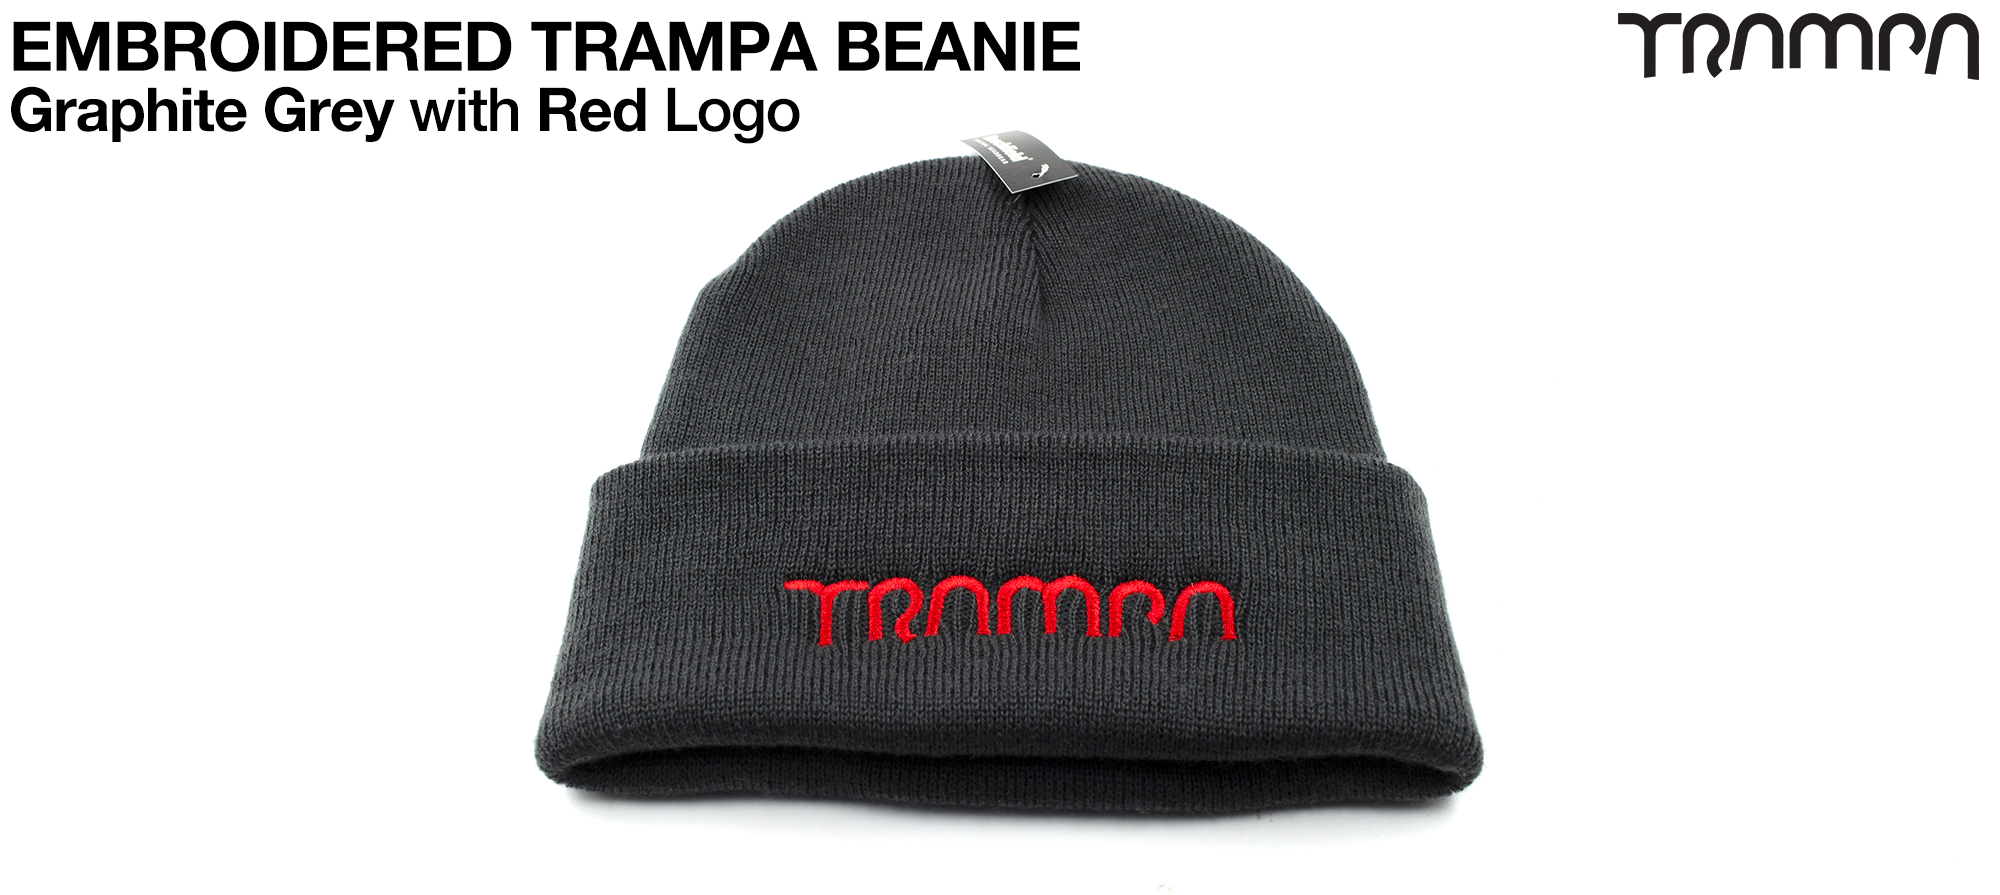 Graphite GREY Woolly hat with Electric Red TRAMPA logo